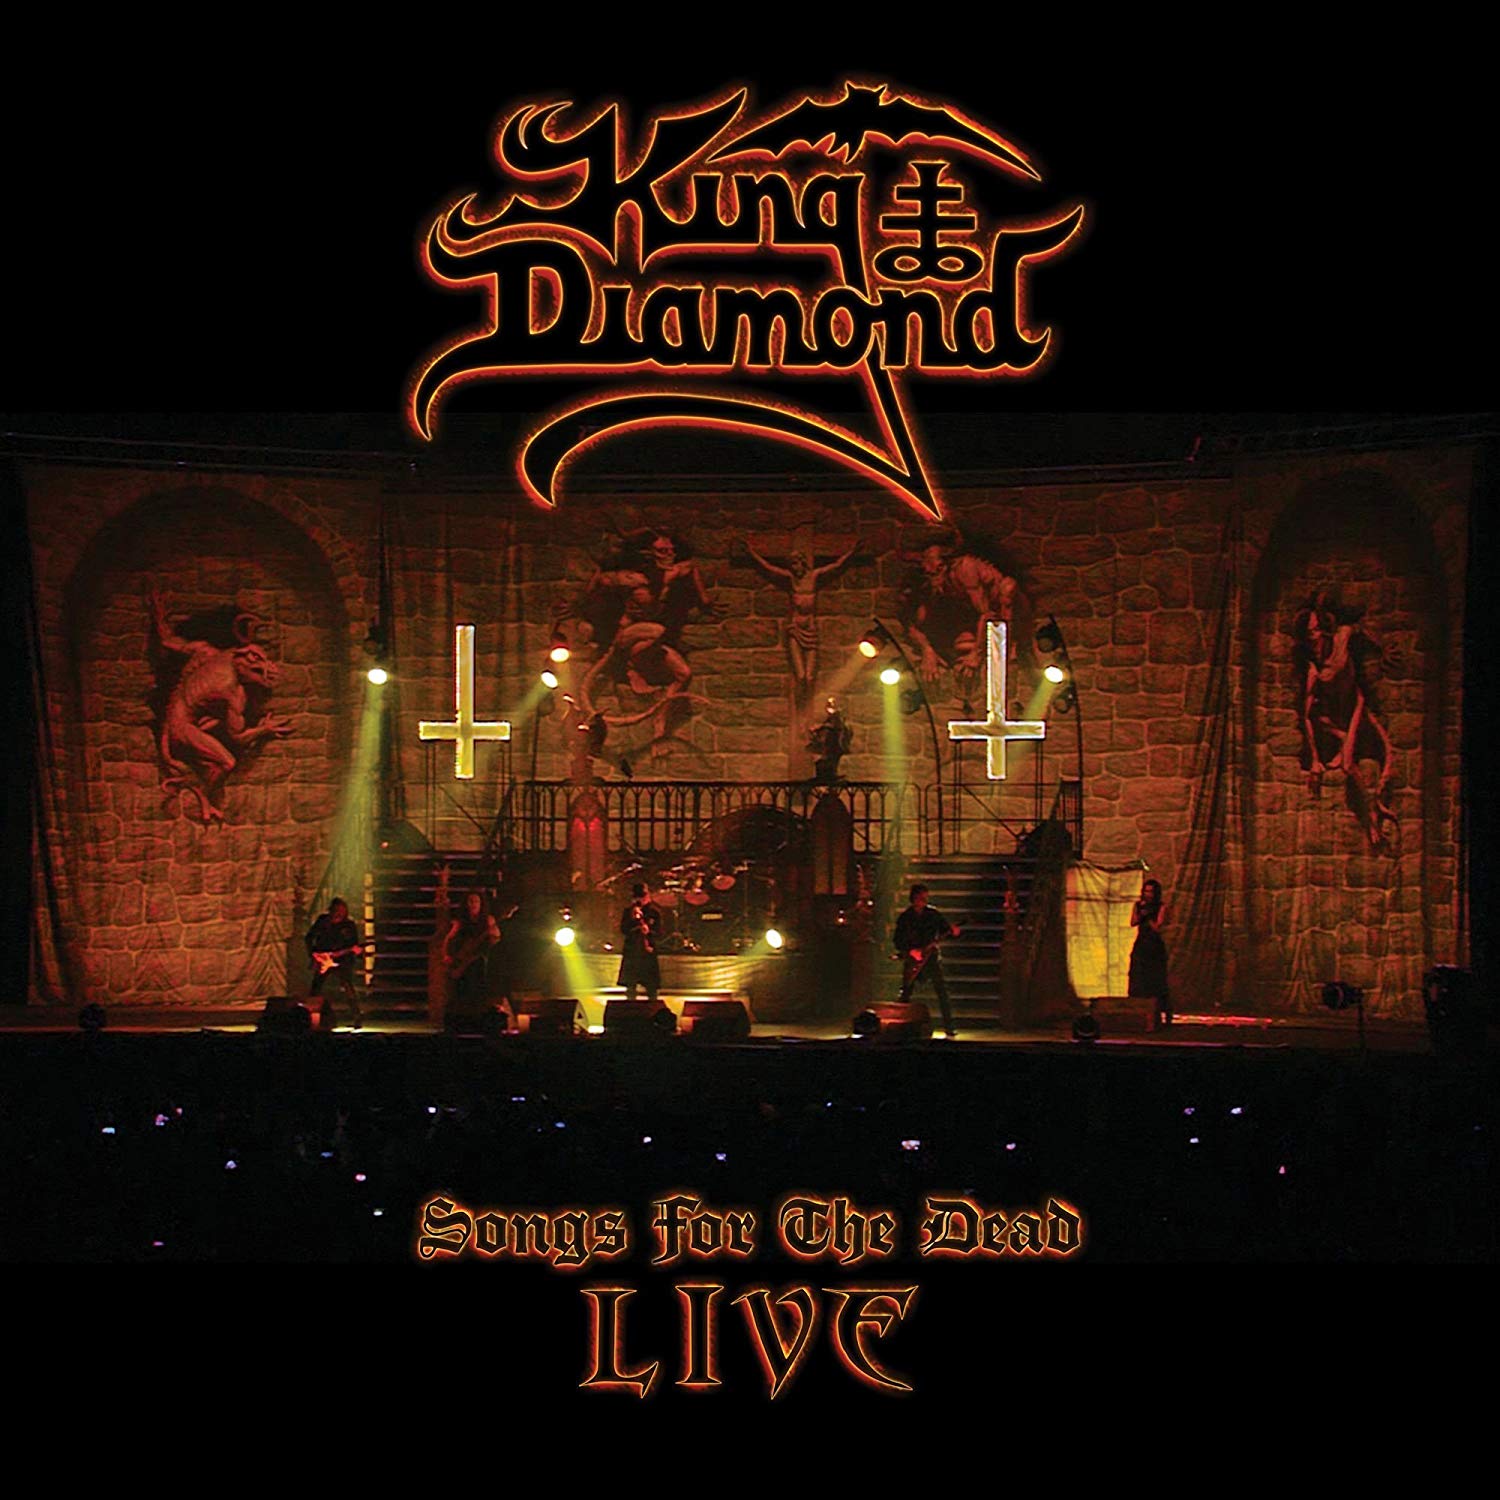 SONGS FOR THE DEAD LIVE-KING DIAMOND